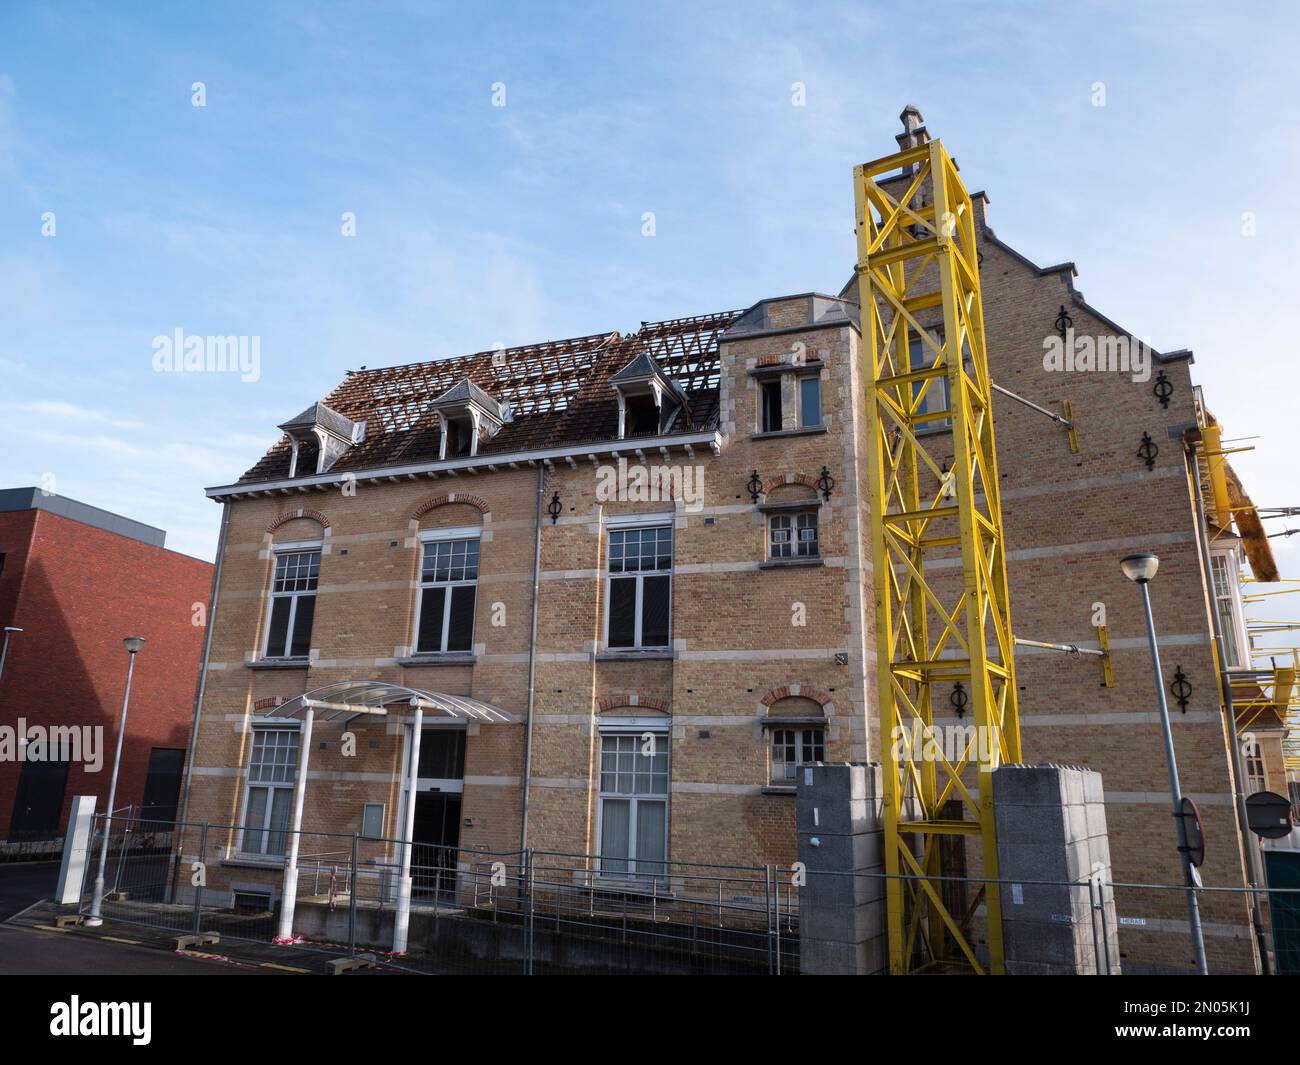 Demolition works begin with the roof of a large housing complex Stock Photo